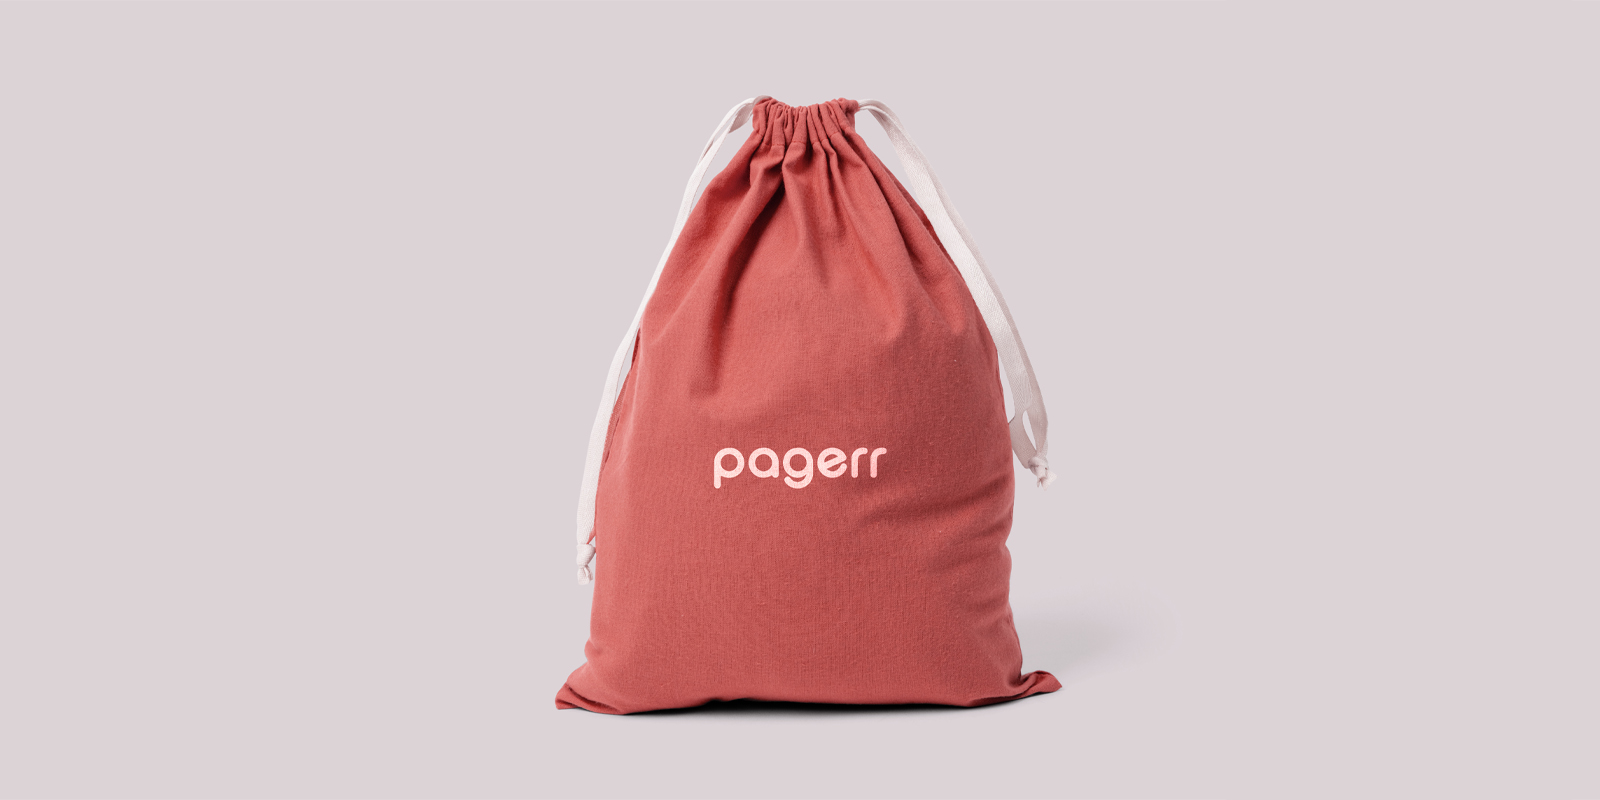 Fabric bags in Barcelona - Print with Pagerr